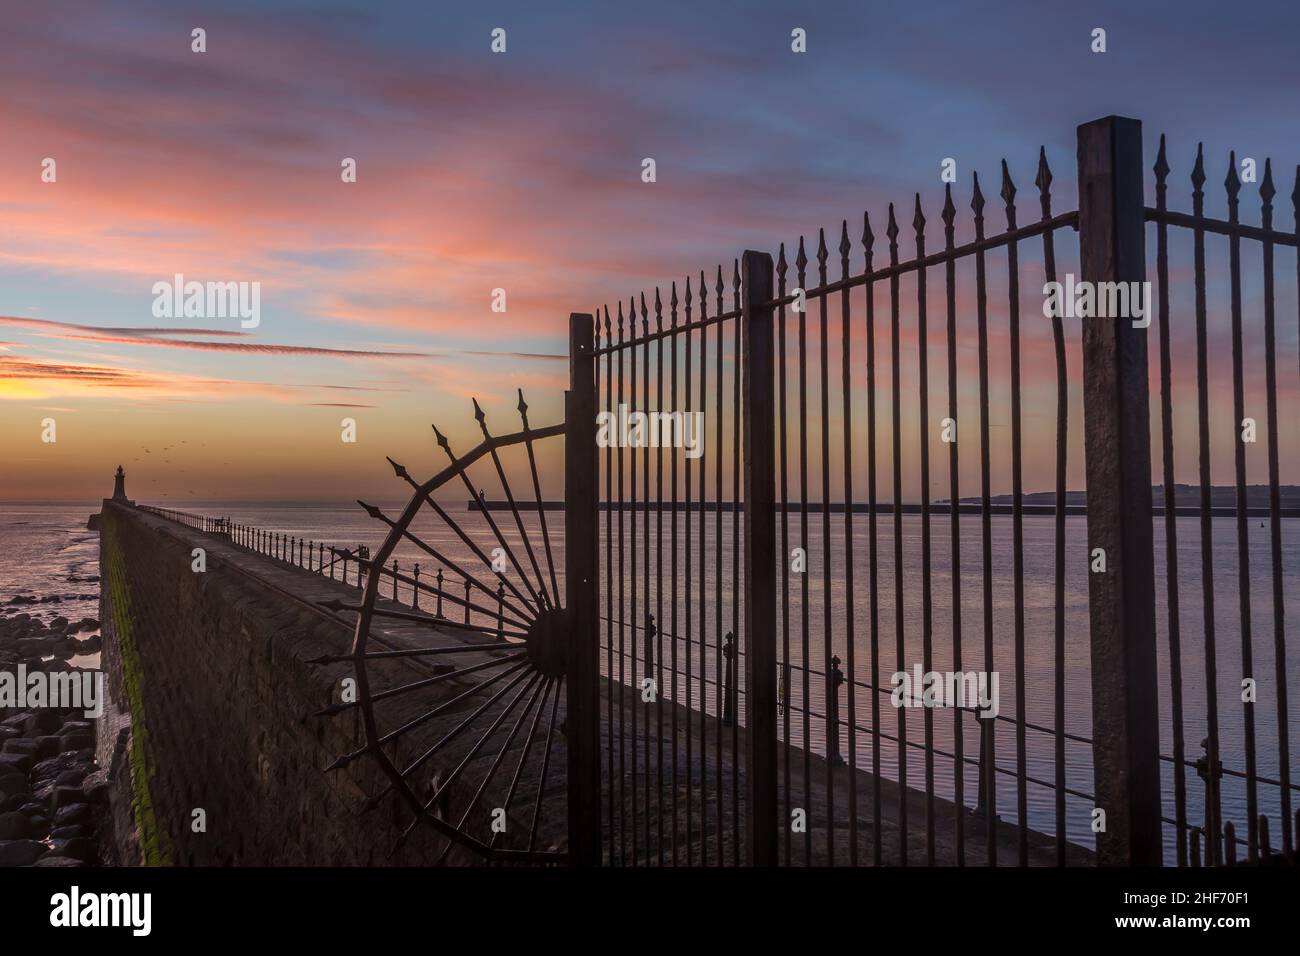 Tynemouth Pier and the Lighthouse through the metal railings with a beautiful vibrant sunrise Stock Photo